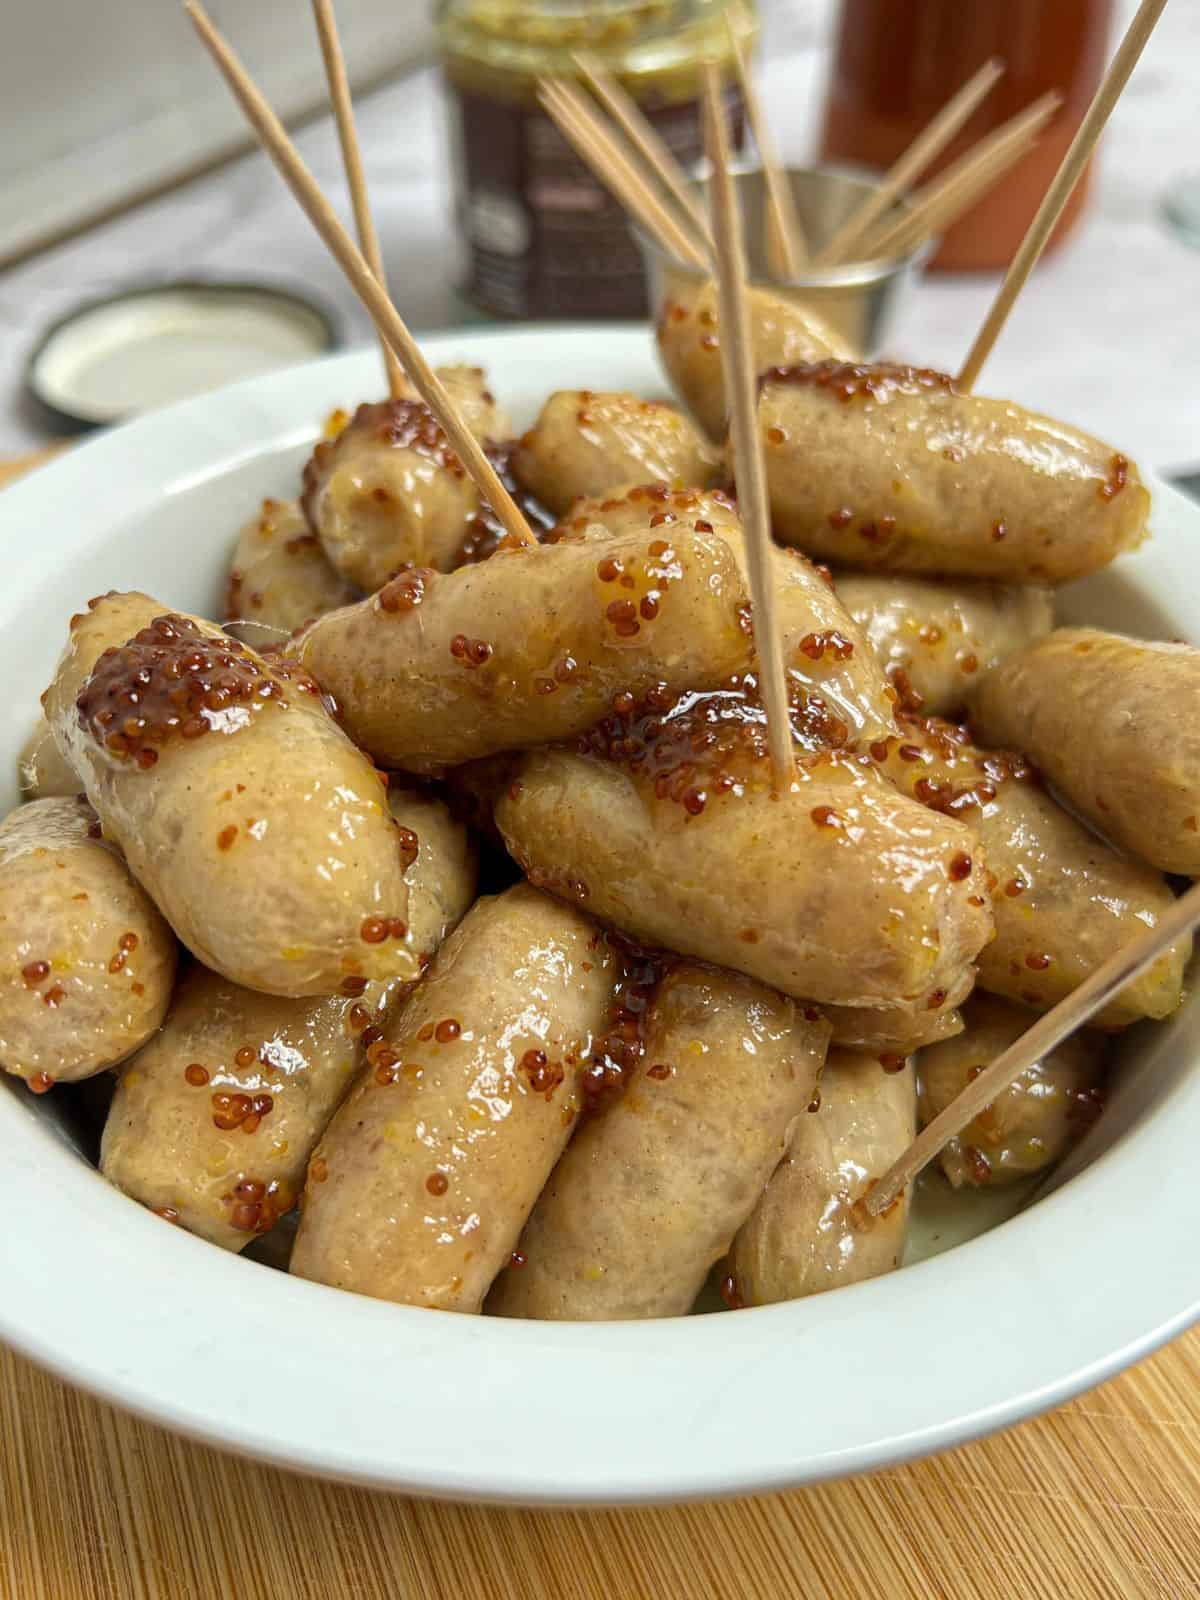 A white bowl containing honey and mustard-coated cocktail sausages, with cocktail sticks poking out of them.